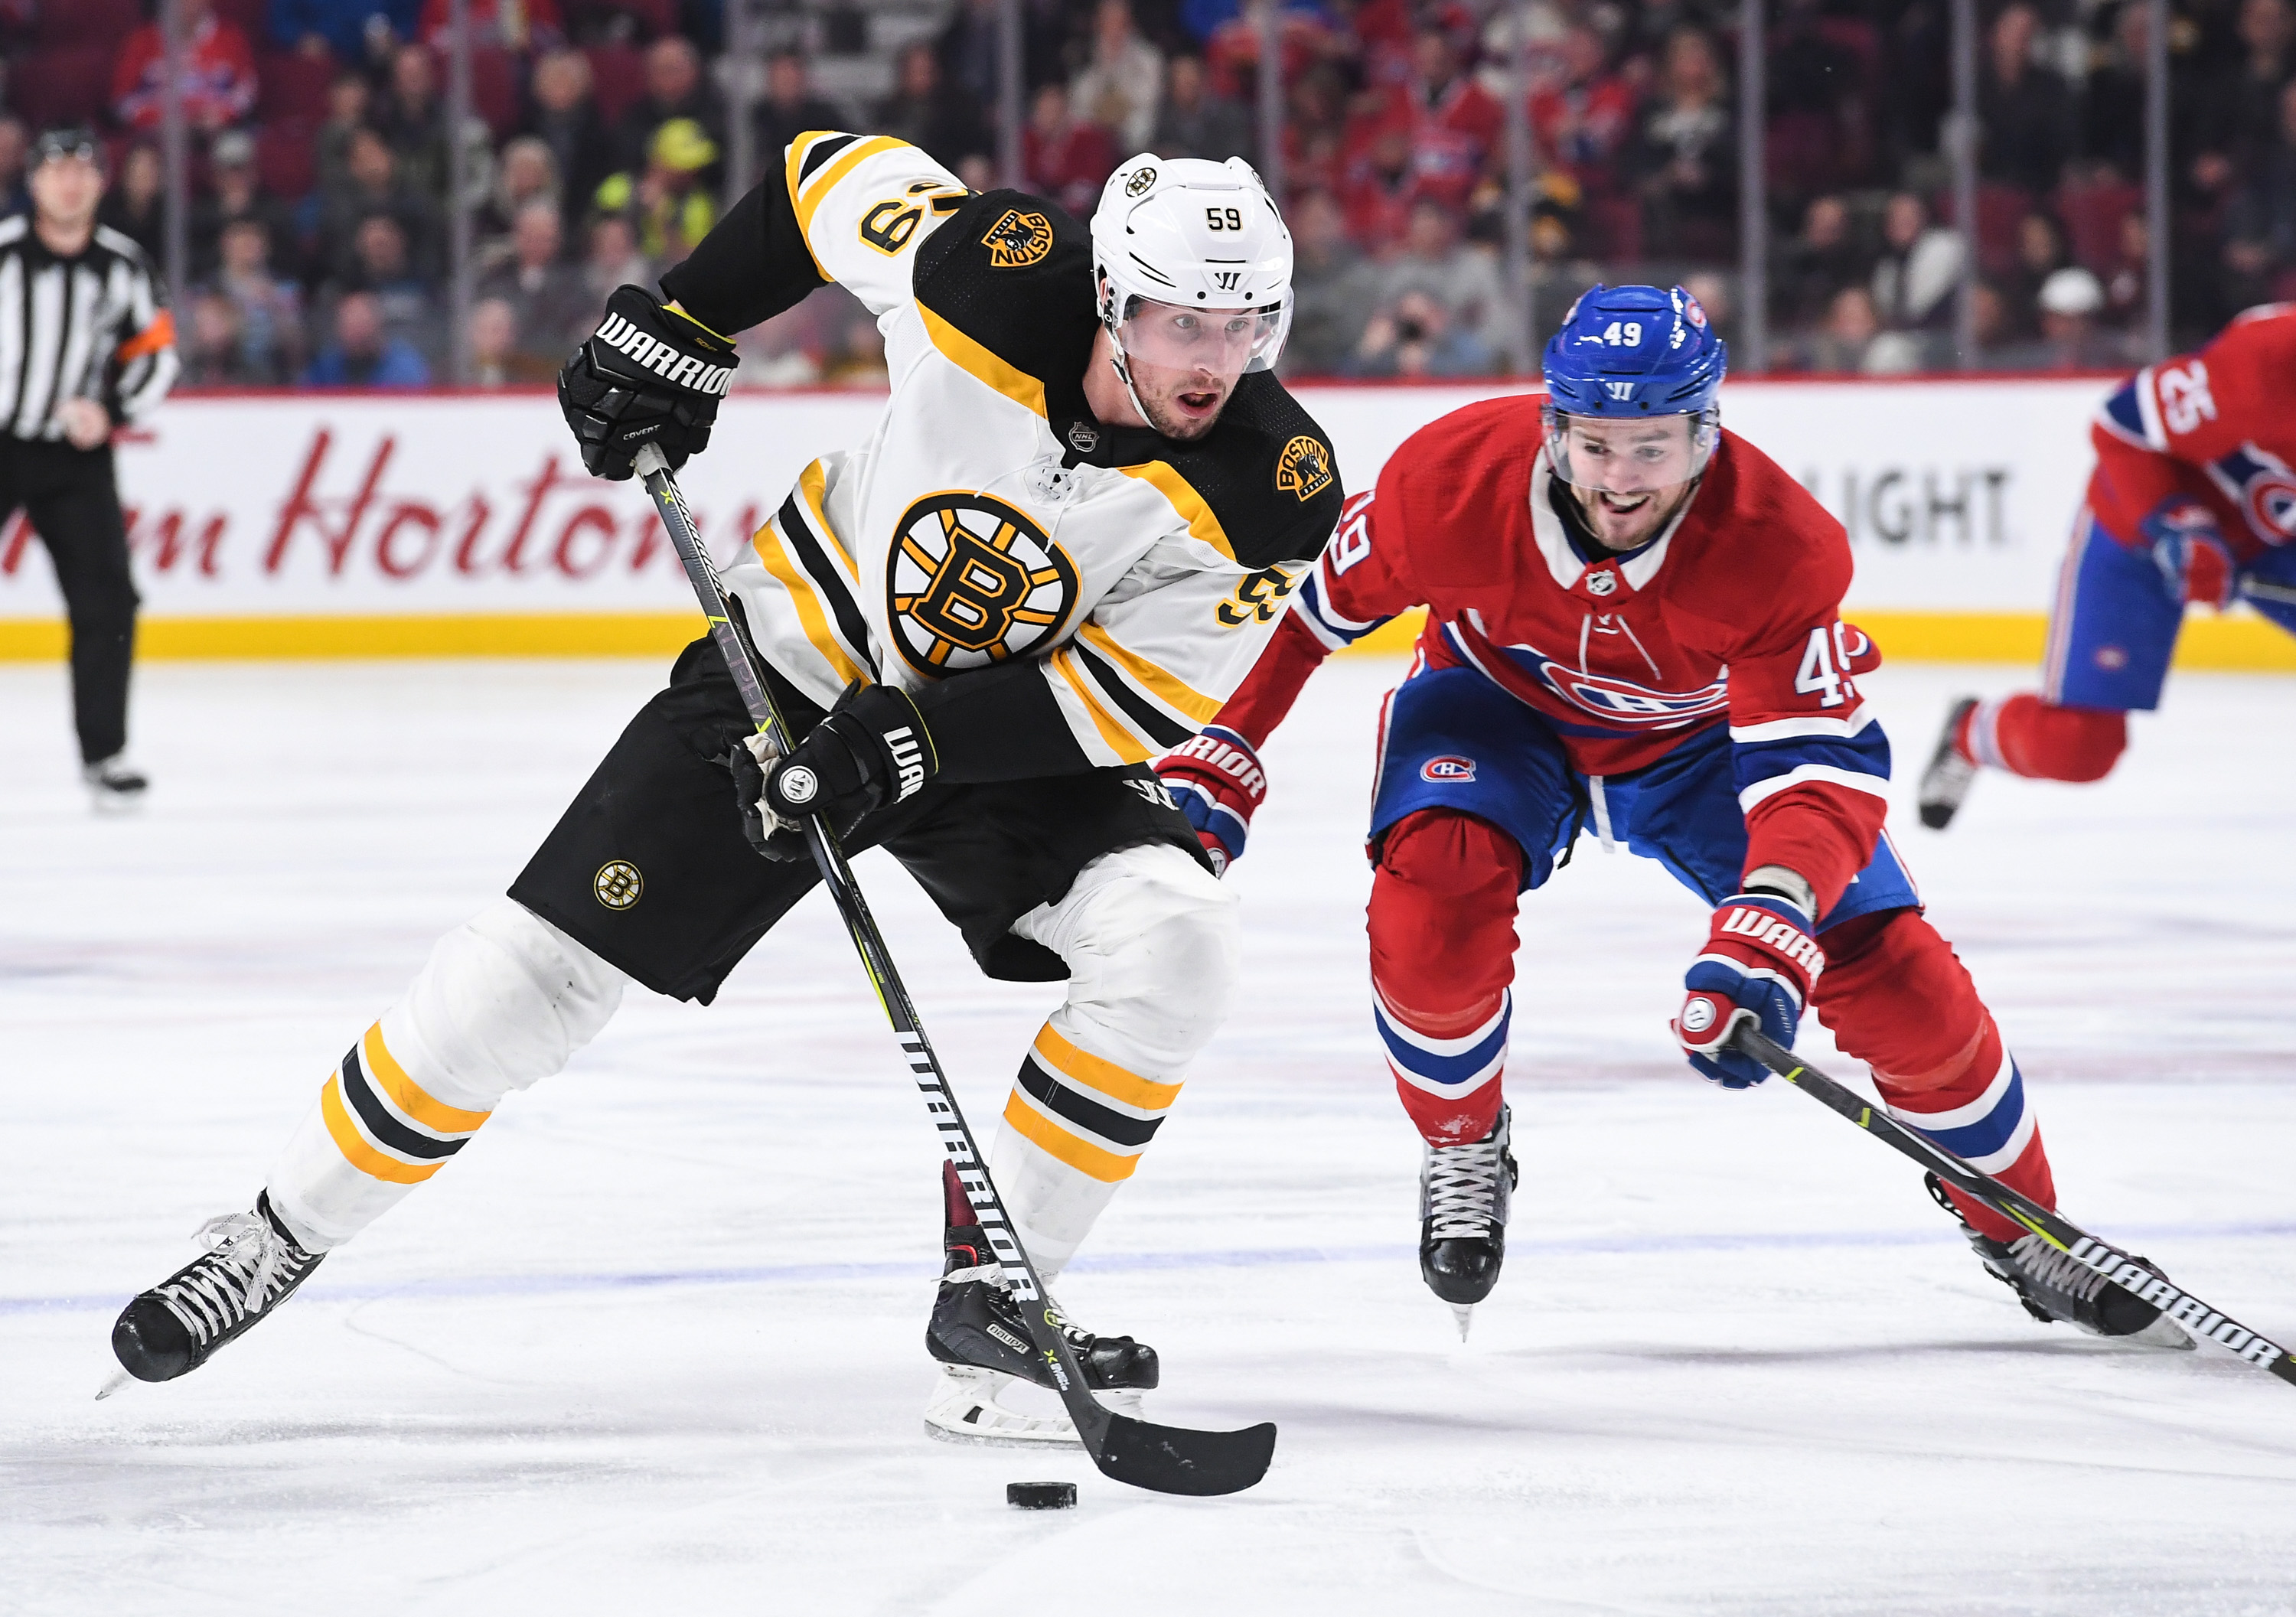 Should Torey Krug be subject to discipline for that hit? - The Boston Globe